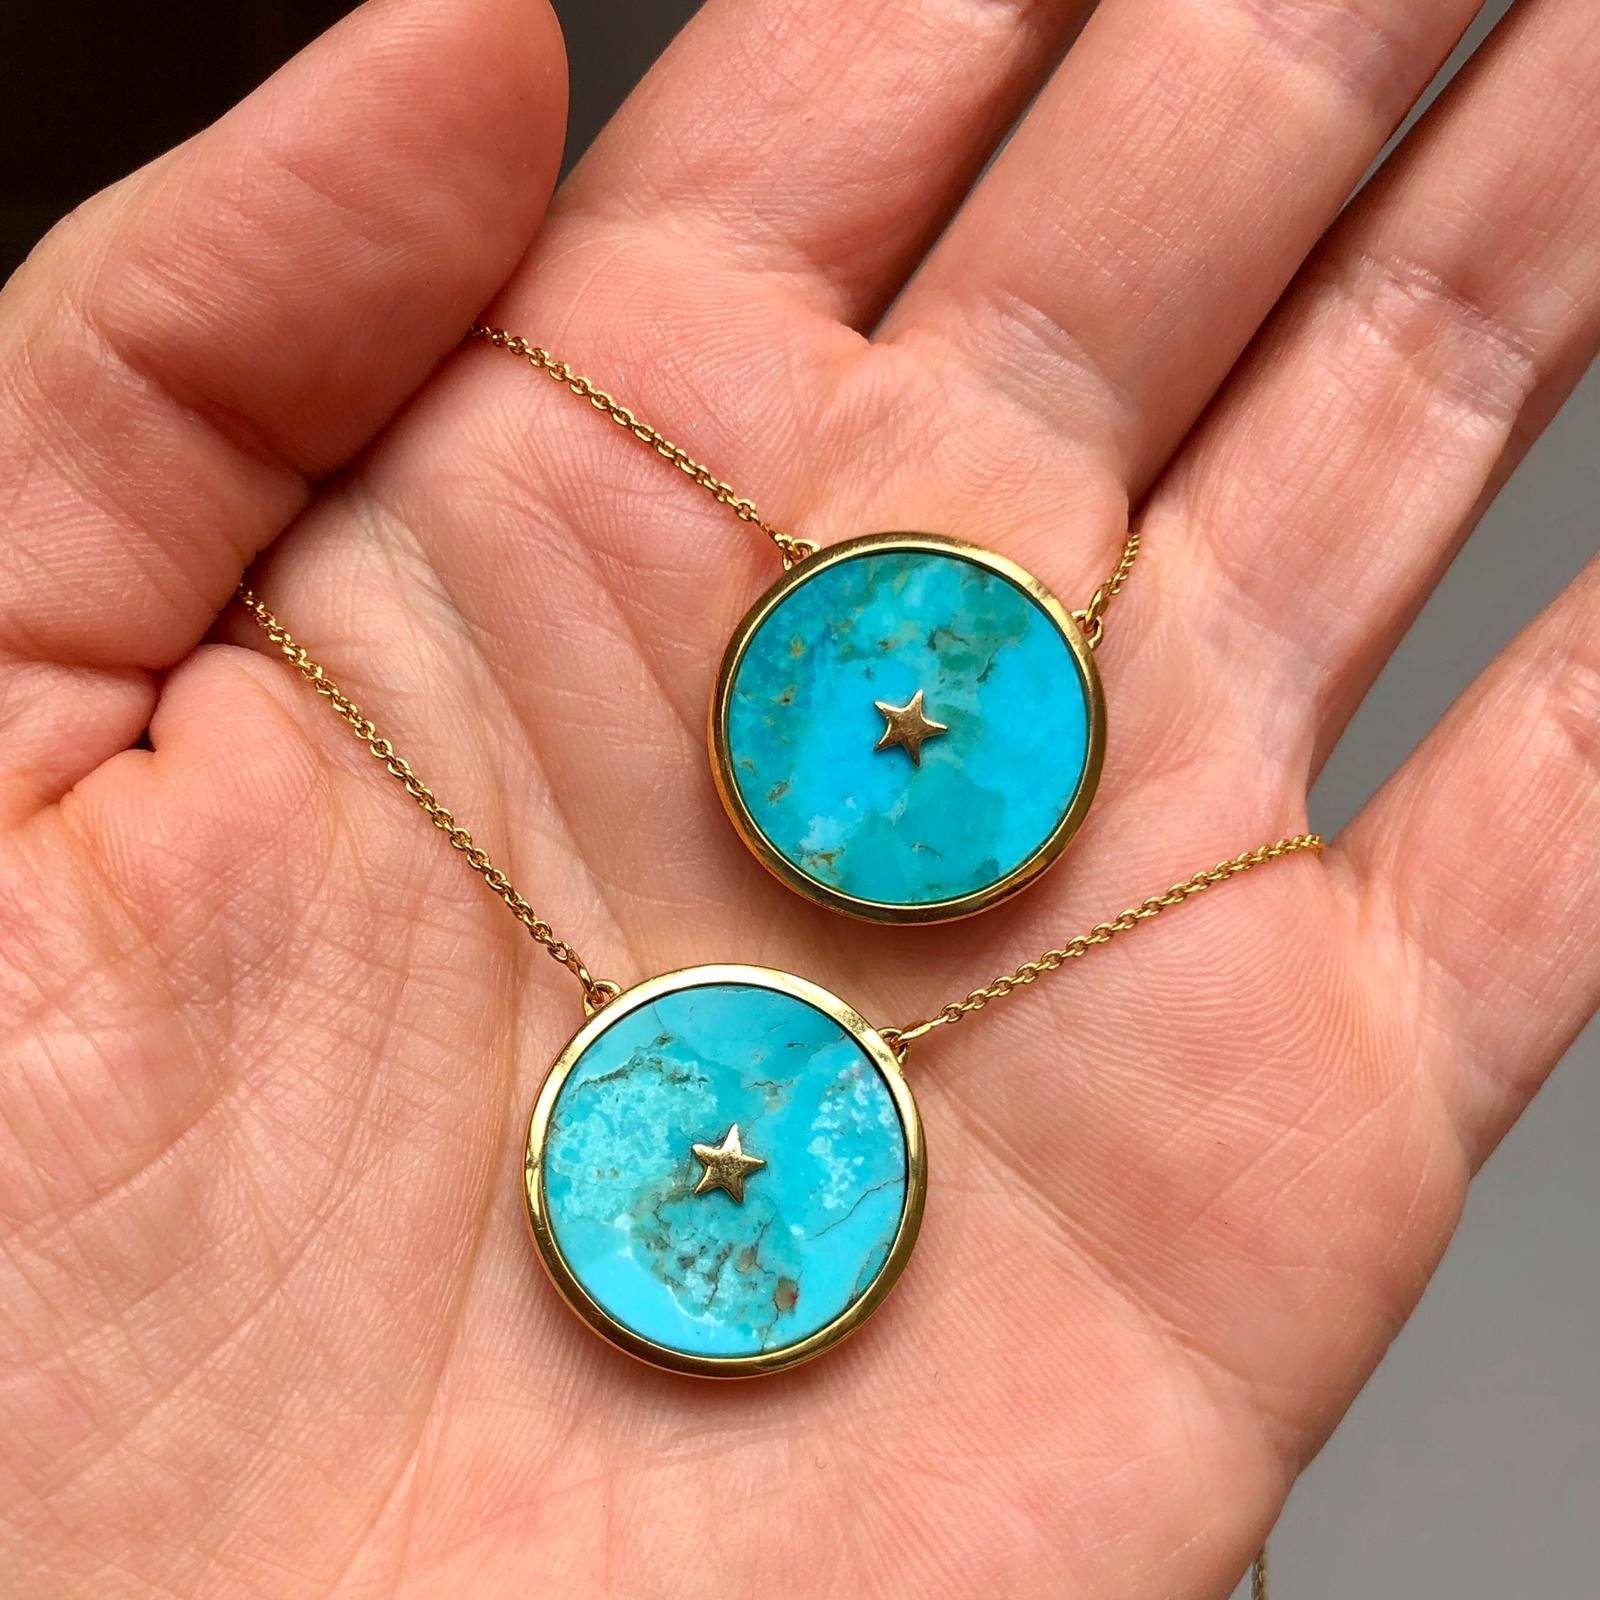 14k Gold Vermeil Night Sky Pendant Necklace in Turquoise Necklace VJI 